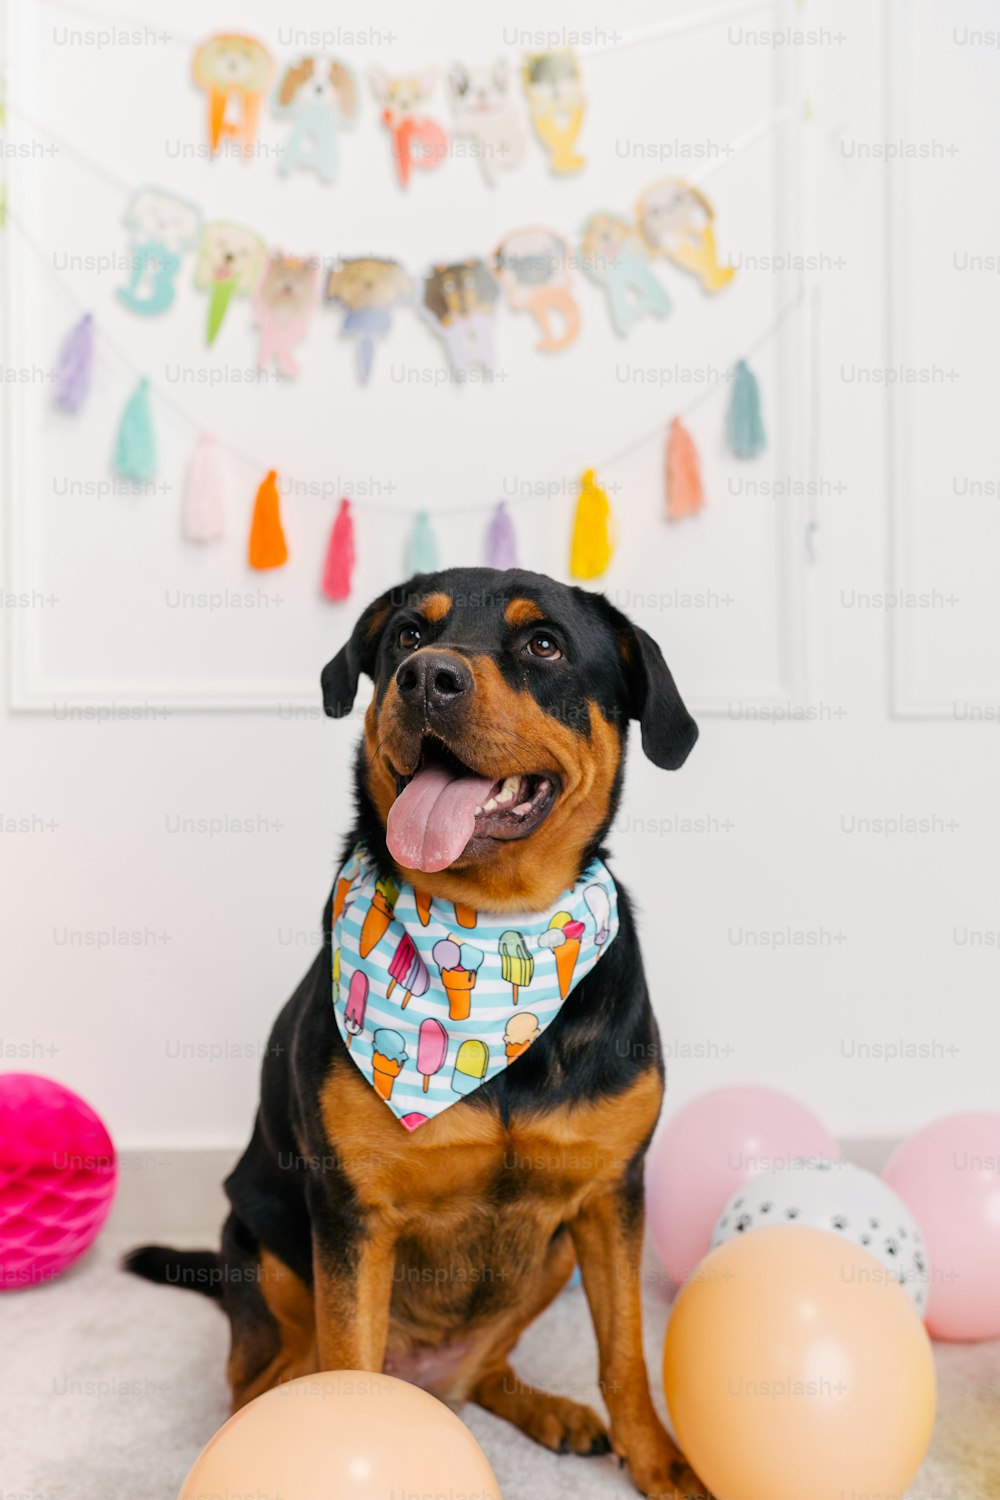 a black and brown dog sitting next to balloons